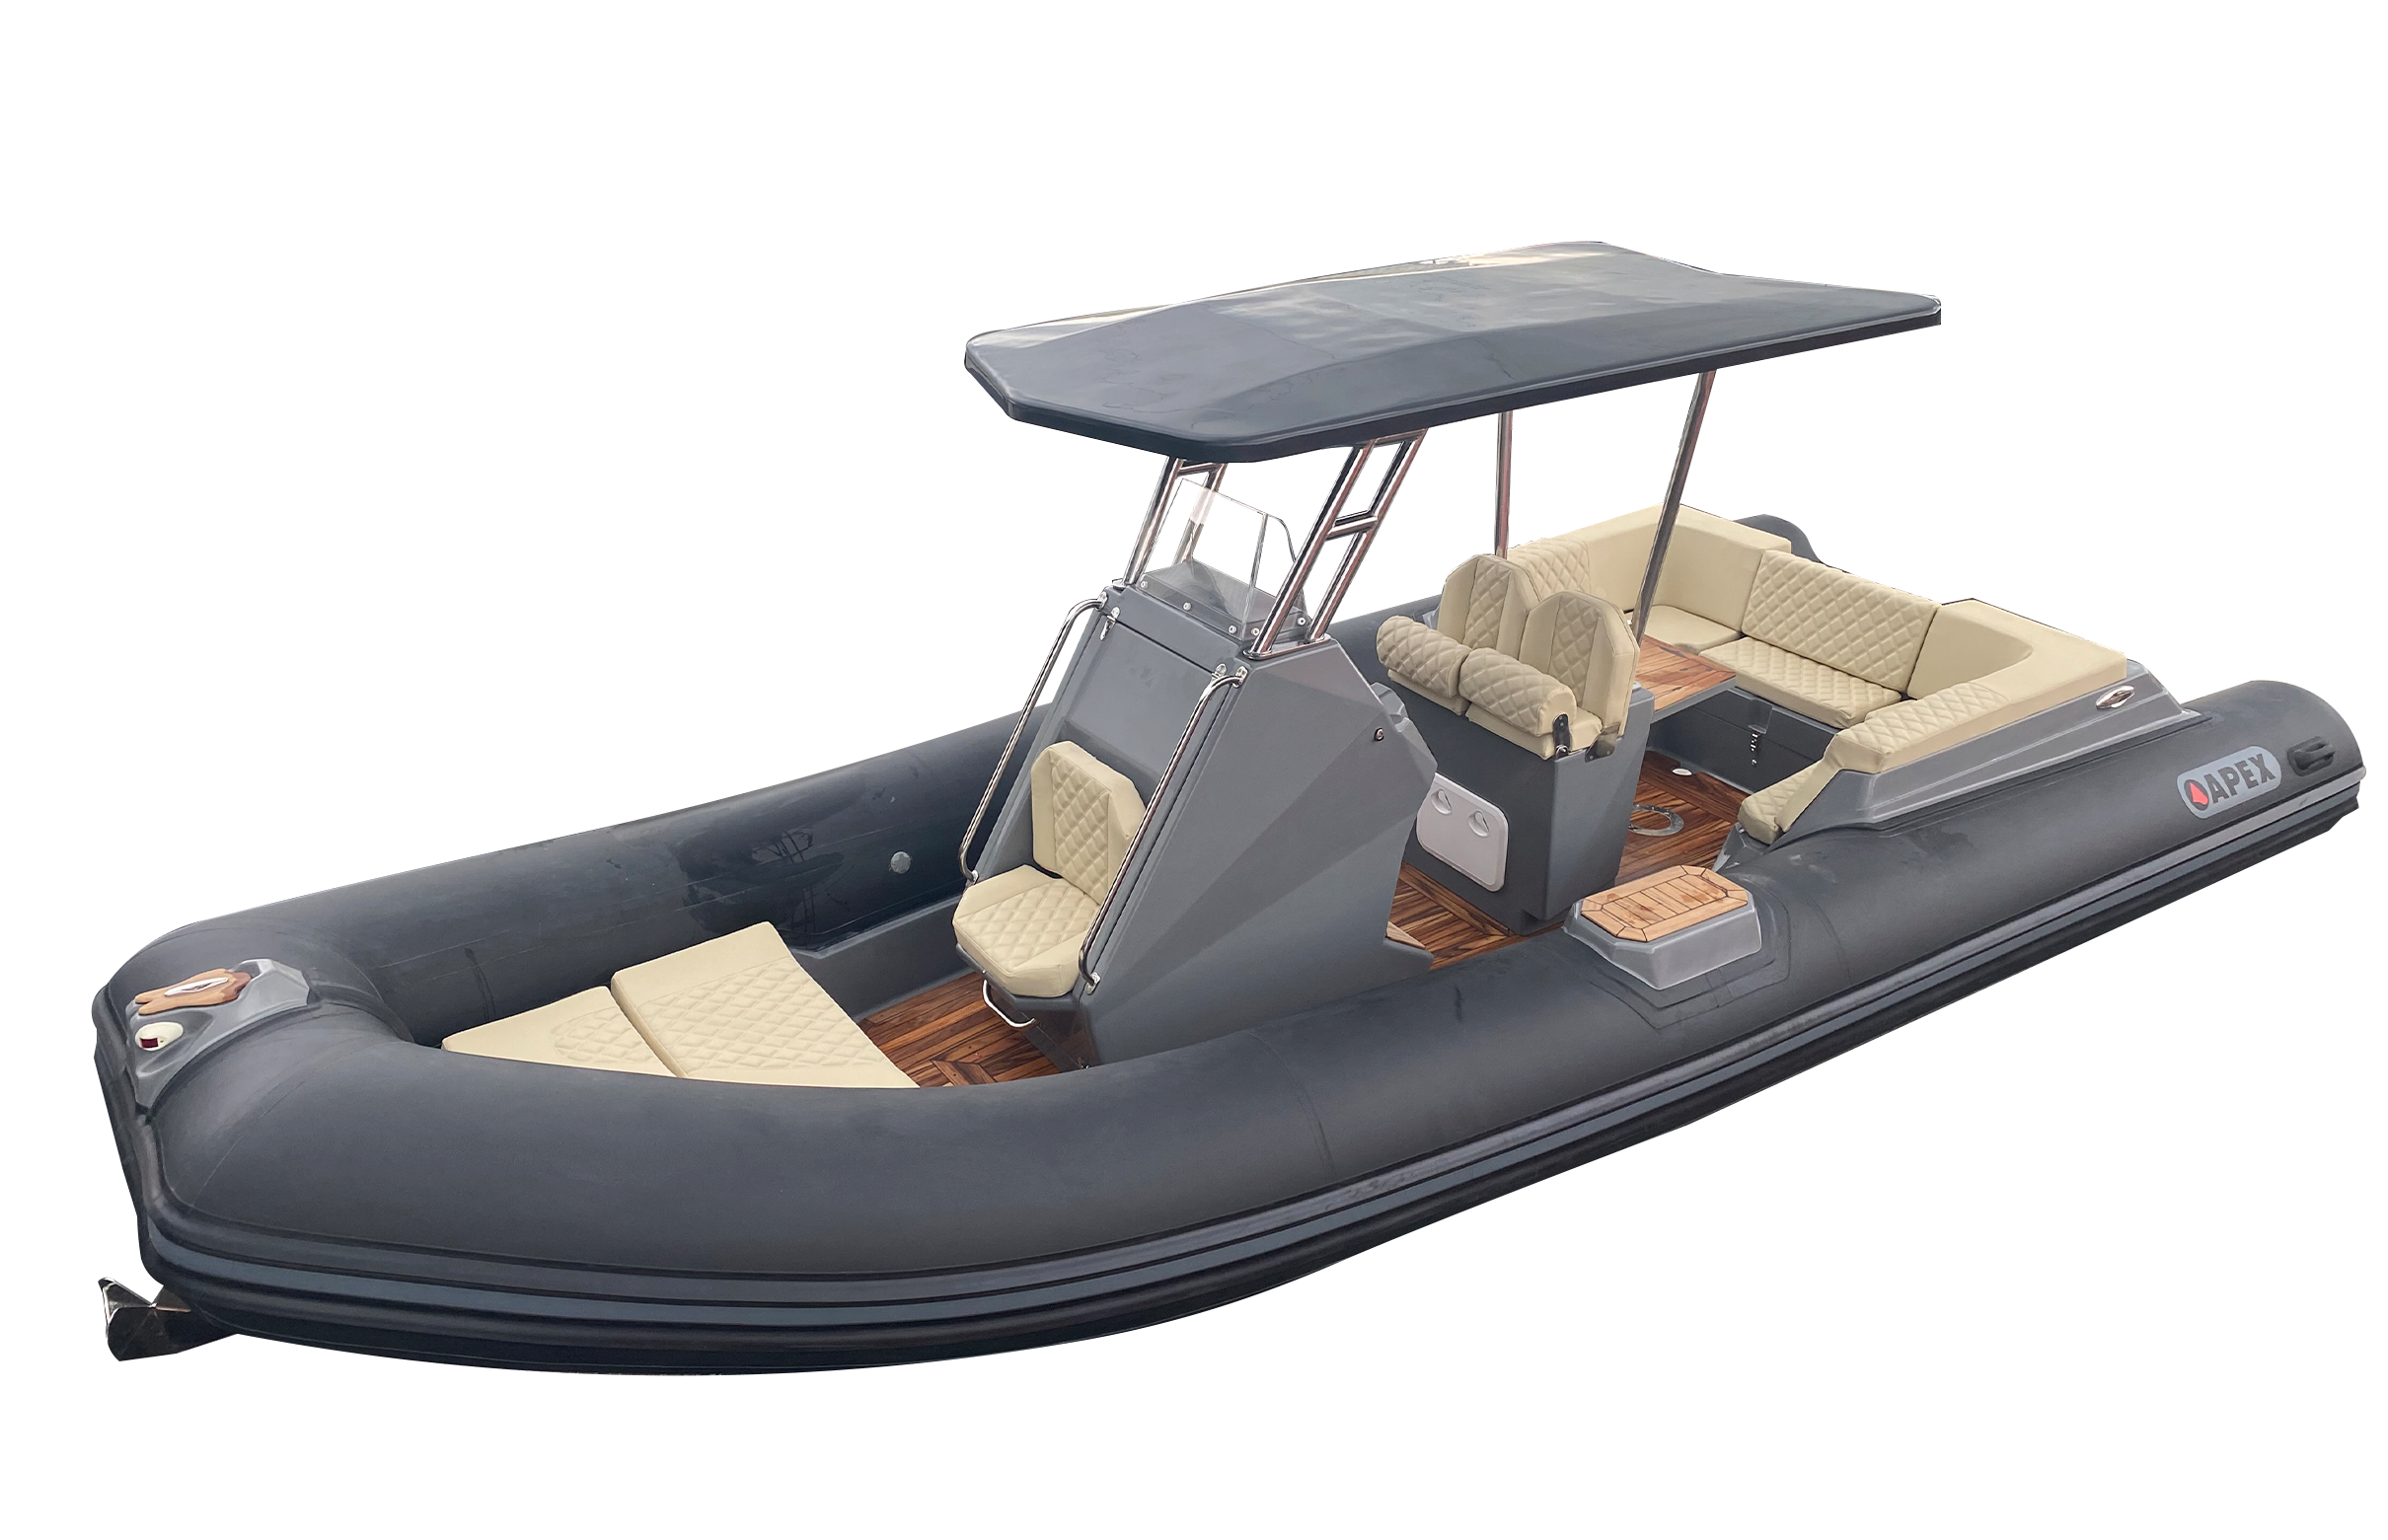 24 ft Dinghy Boats, Fiberglass hull  Inflatables Dinghies Apex Boats for professionals with console Deluxe tender line